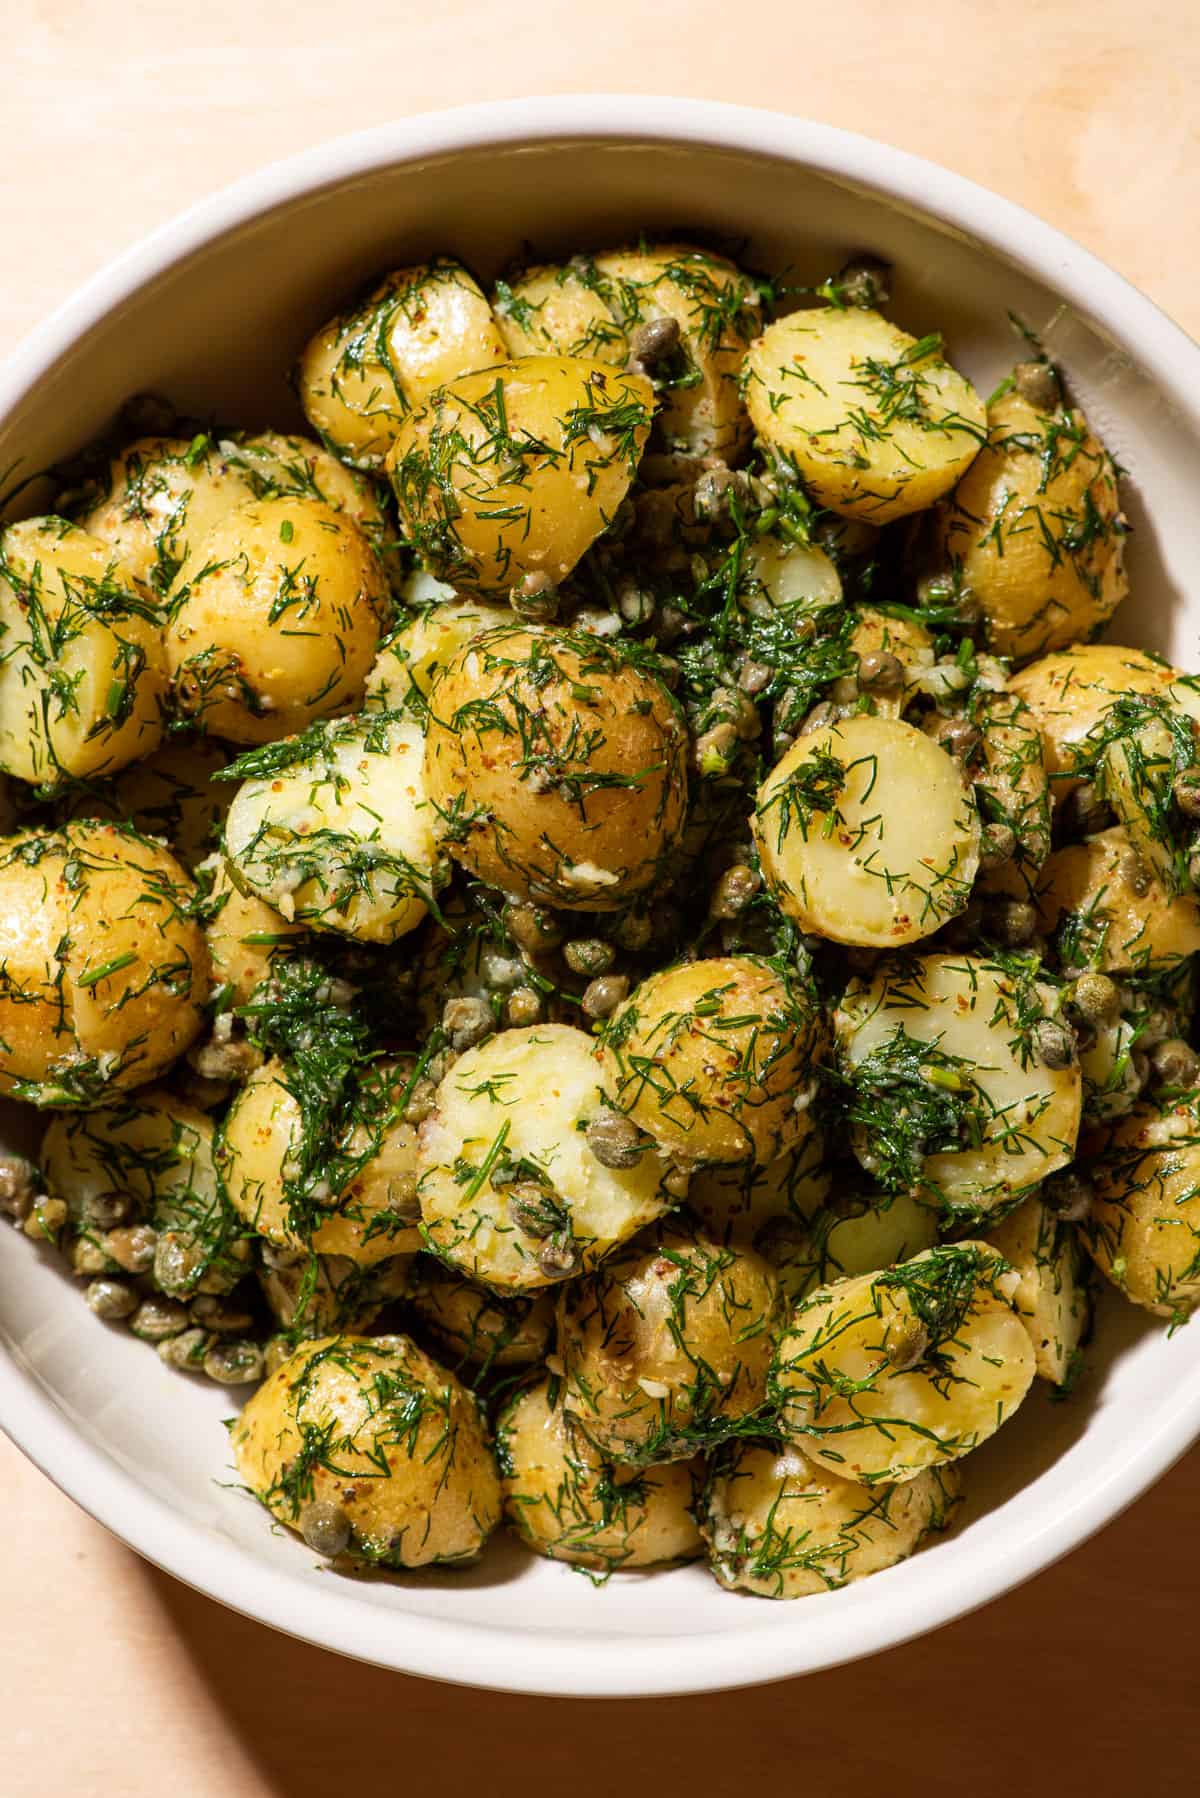 Bowl of French-style potato salad with dill and capers (no mayo).